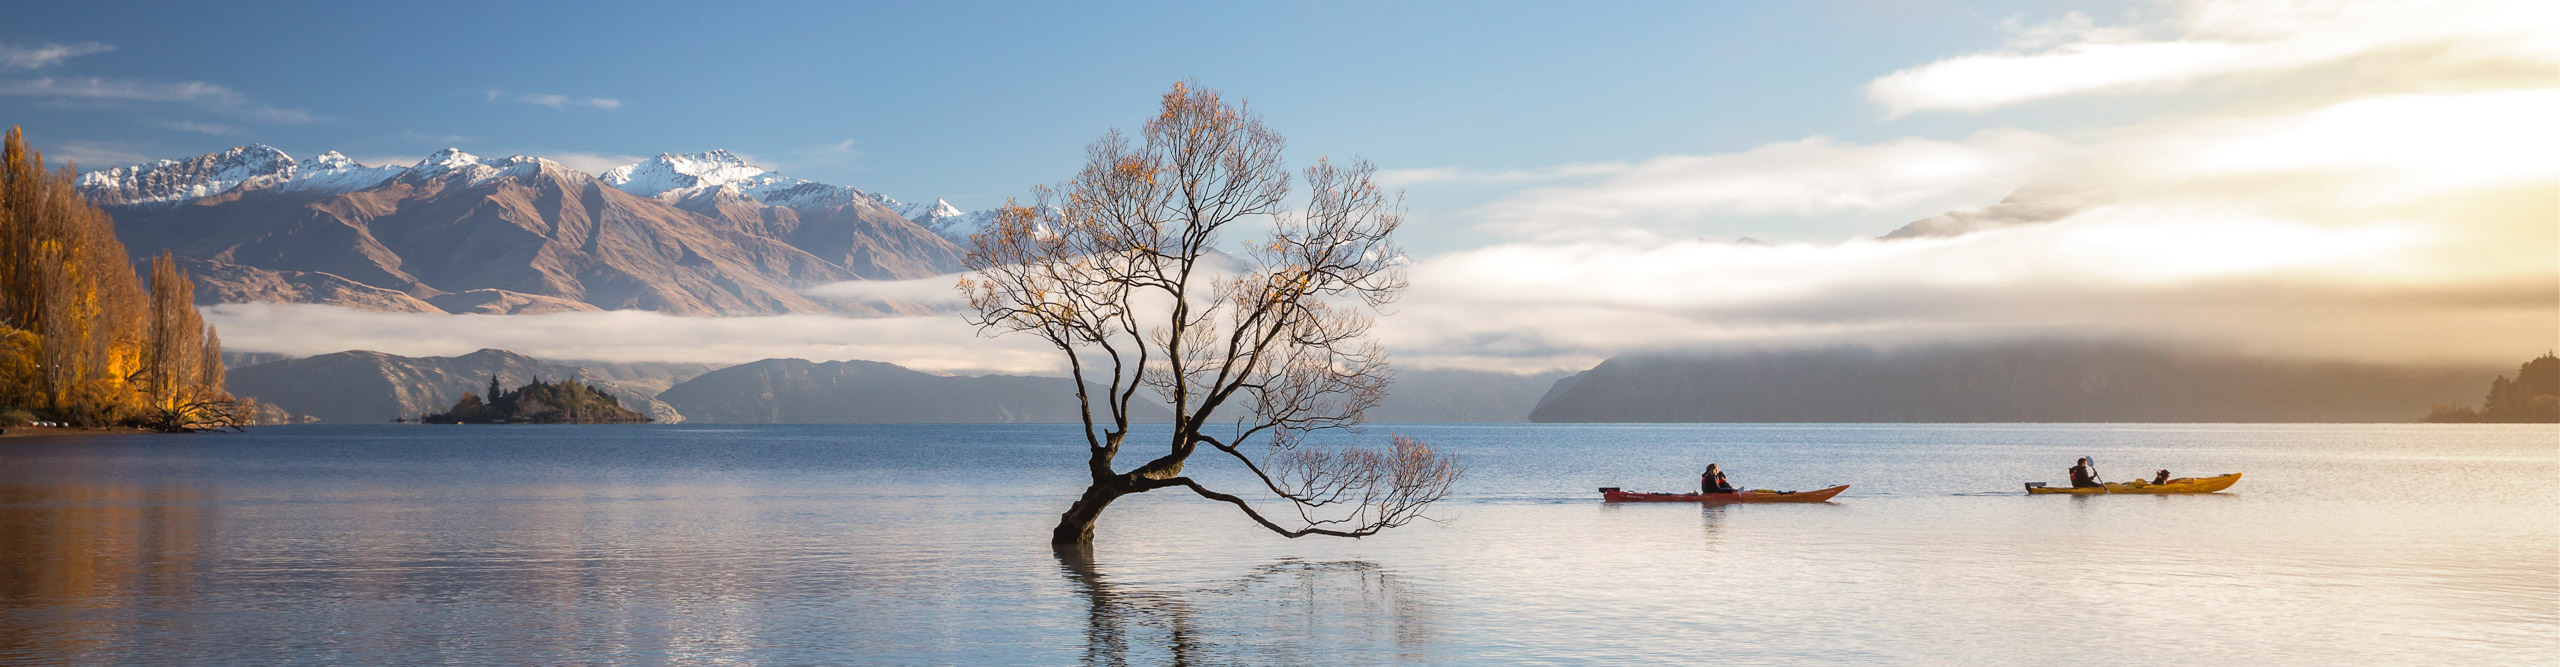 kayakers on the water by the famous tree in the water at Lake Wanaka with mountains in the distance